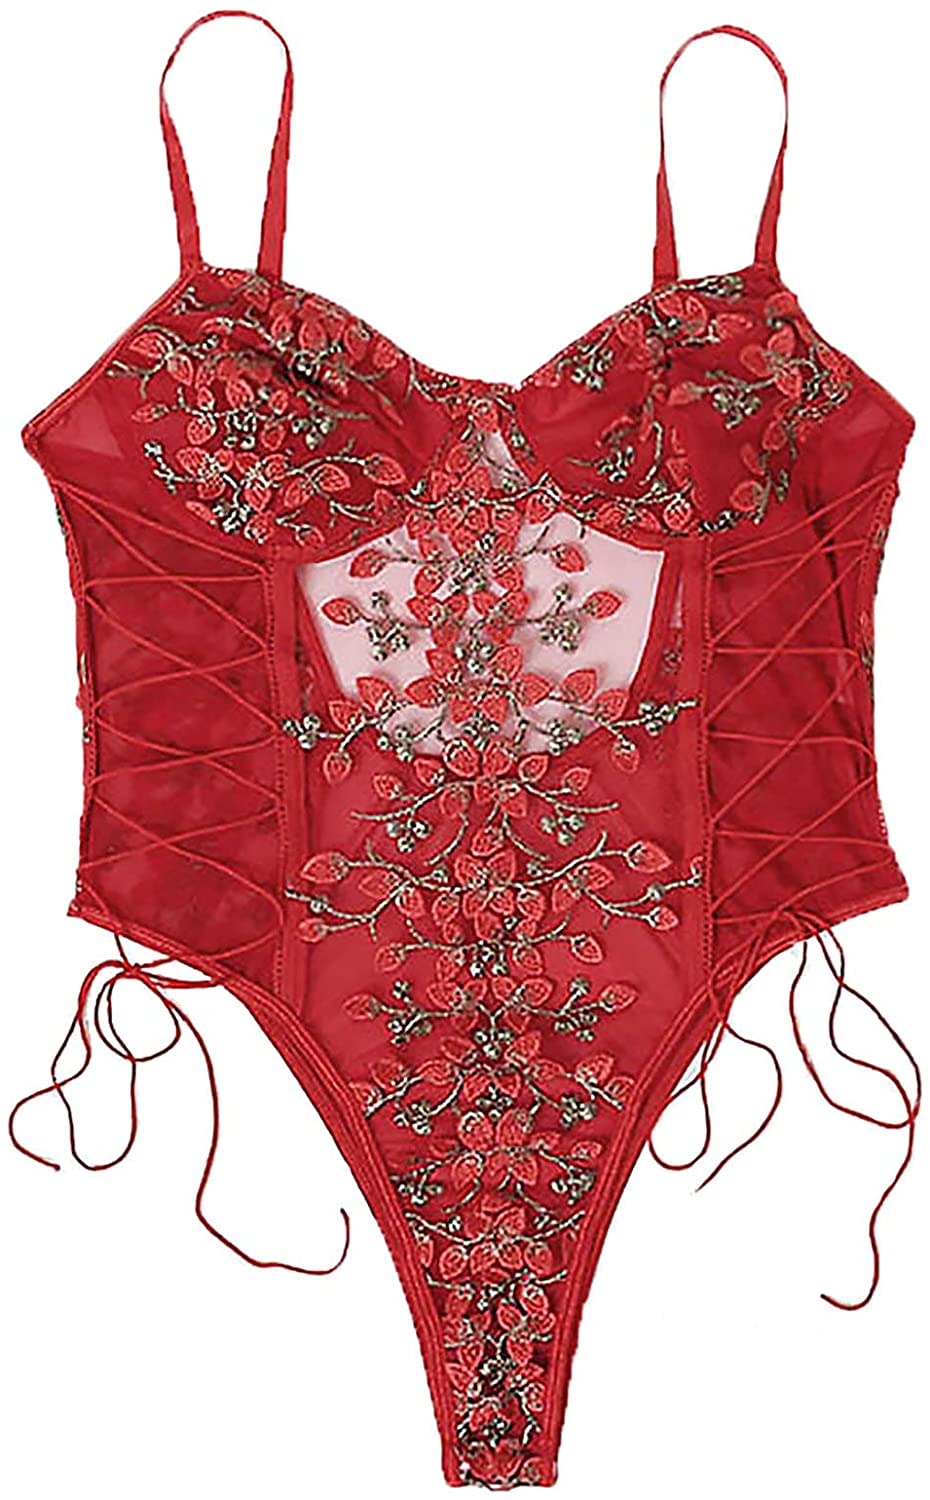 Lilosy Women Sexy Lace Up Floral Embroidered Teddy Lingerie